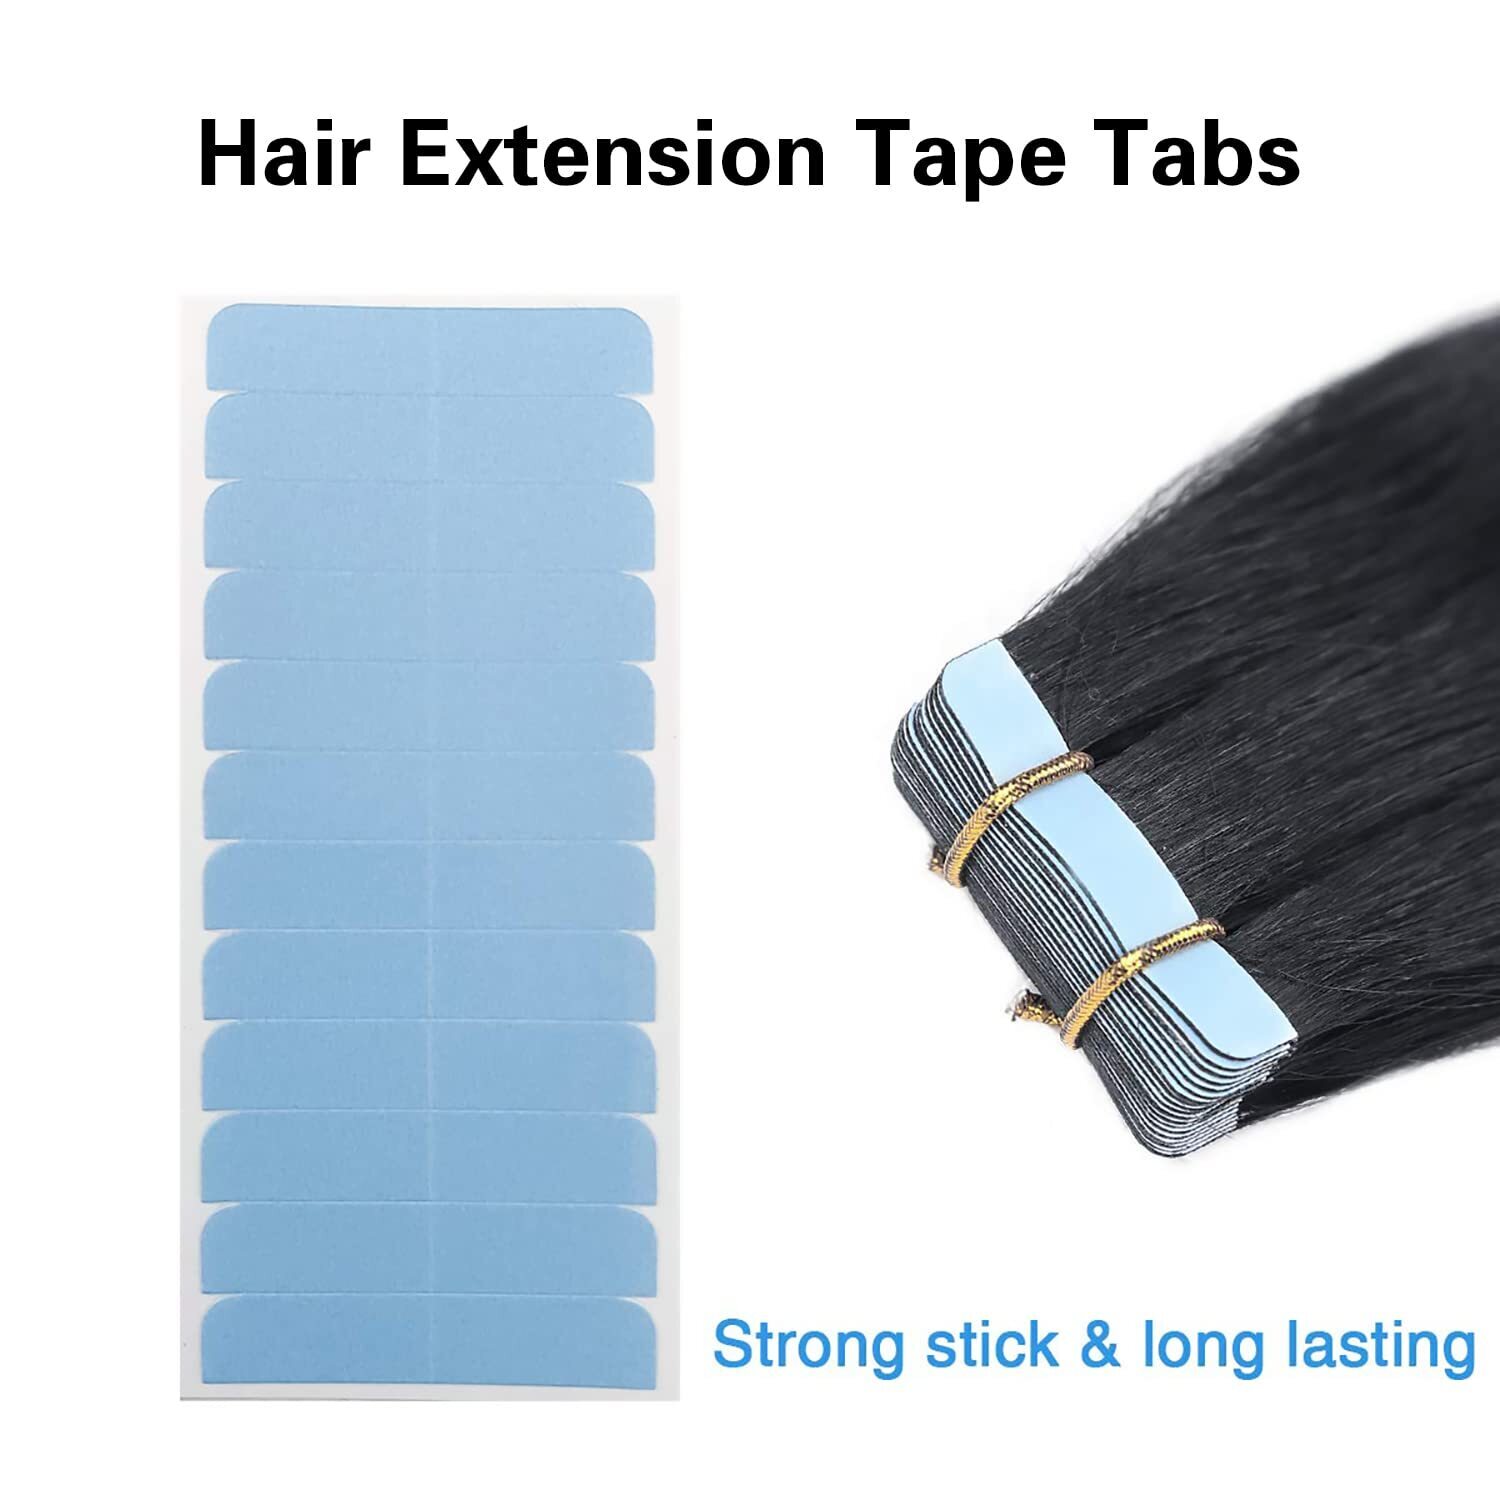 60Pieces Hair Extension Tape Tabs Double Sided Replacement Tape in Hair Extensions Adhesive Hair Extension Tapes Hair Extension 60Pieces Hair Extension Tape Tabs Double Sided Replacement Tape in Hair Extensions Adhesive Hair Extension Tapes Hair Extension